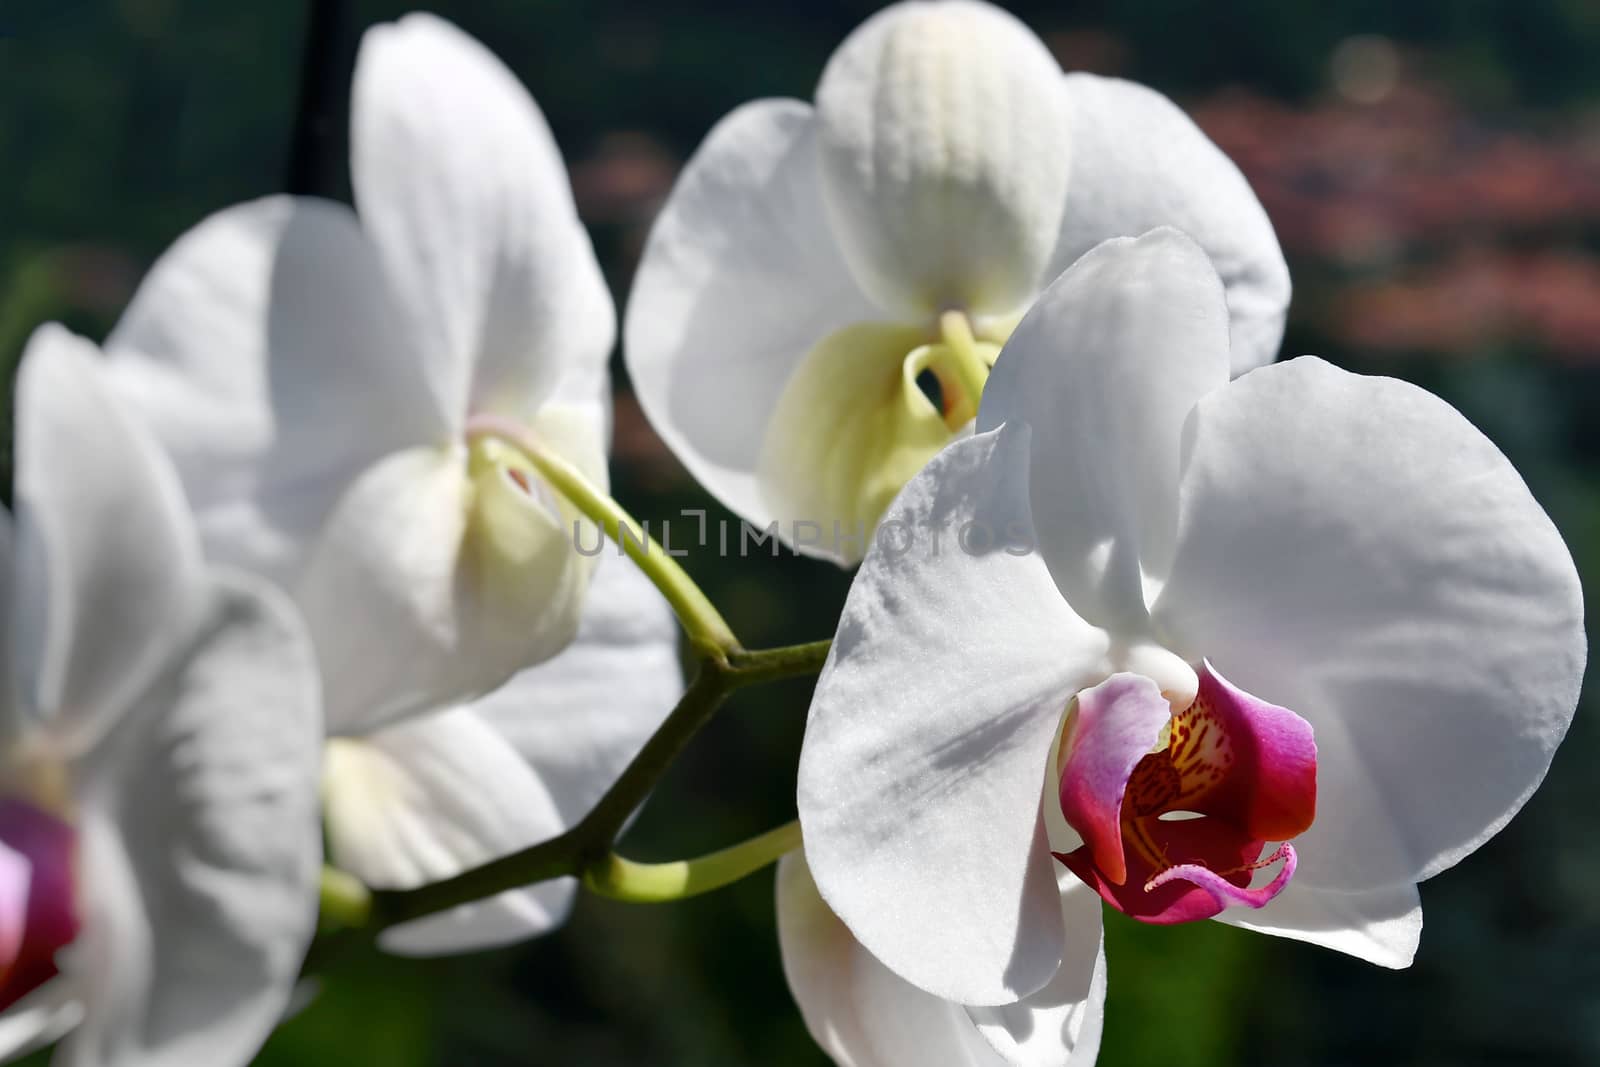 The beautiful white orchid flowers